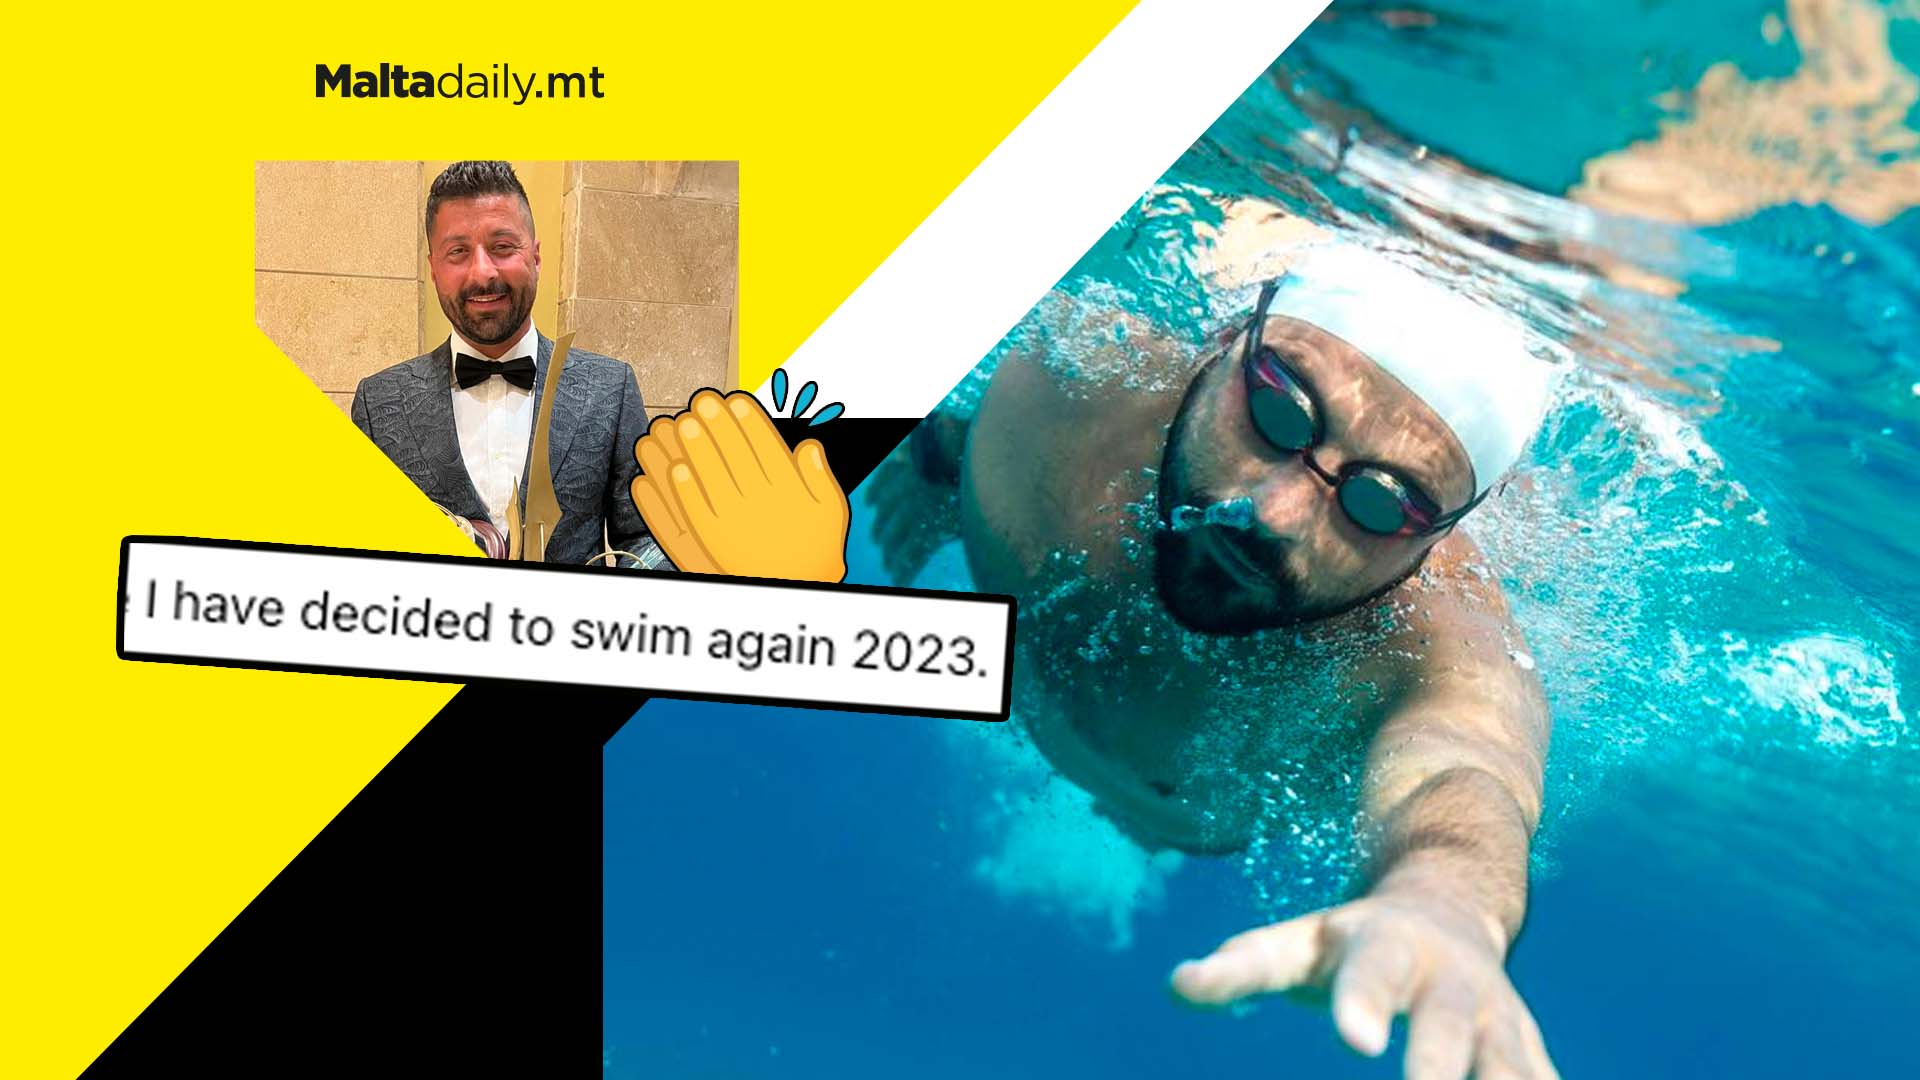 Local record breaking swimmer Neil Agius to return with 2023 swim